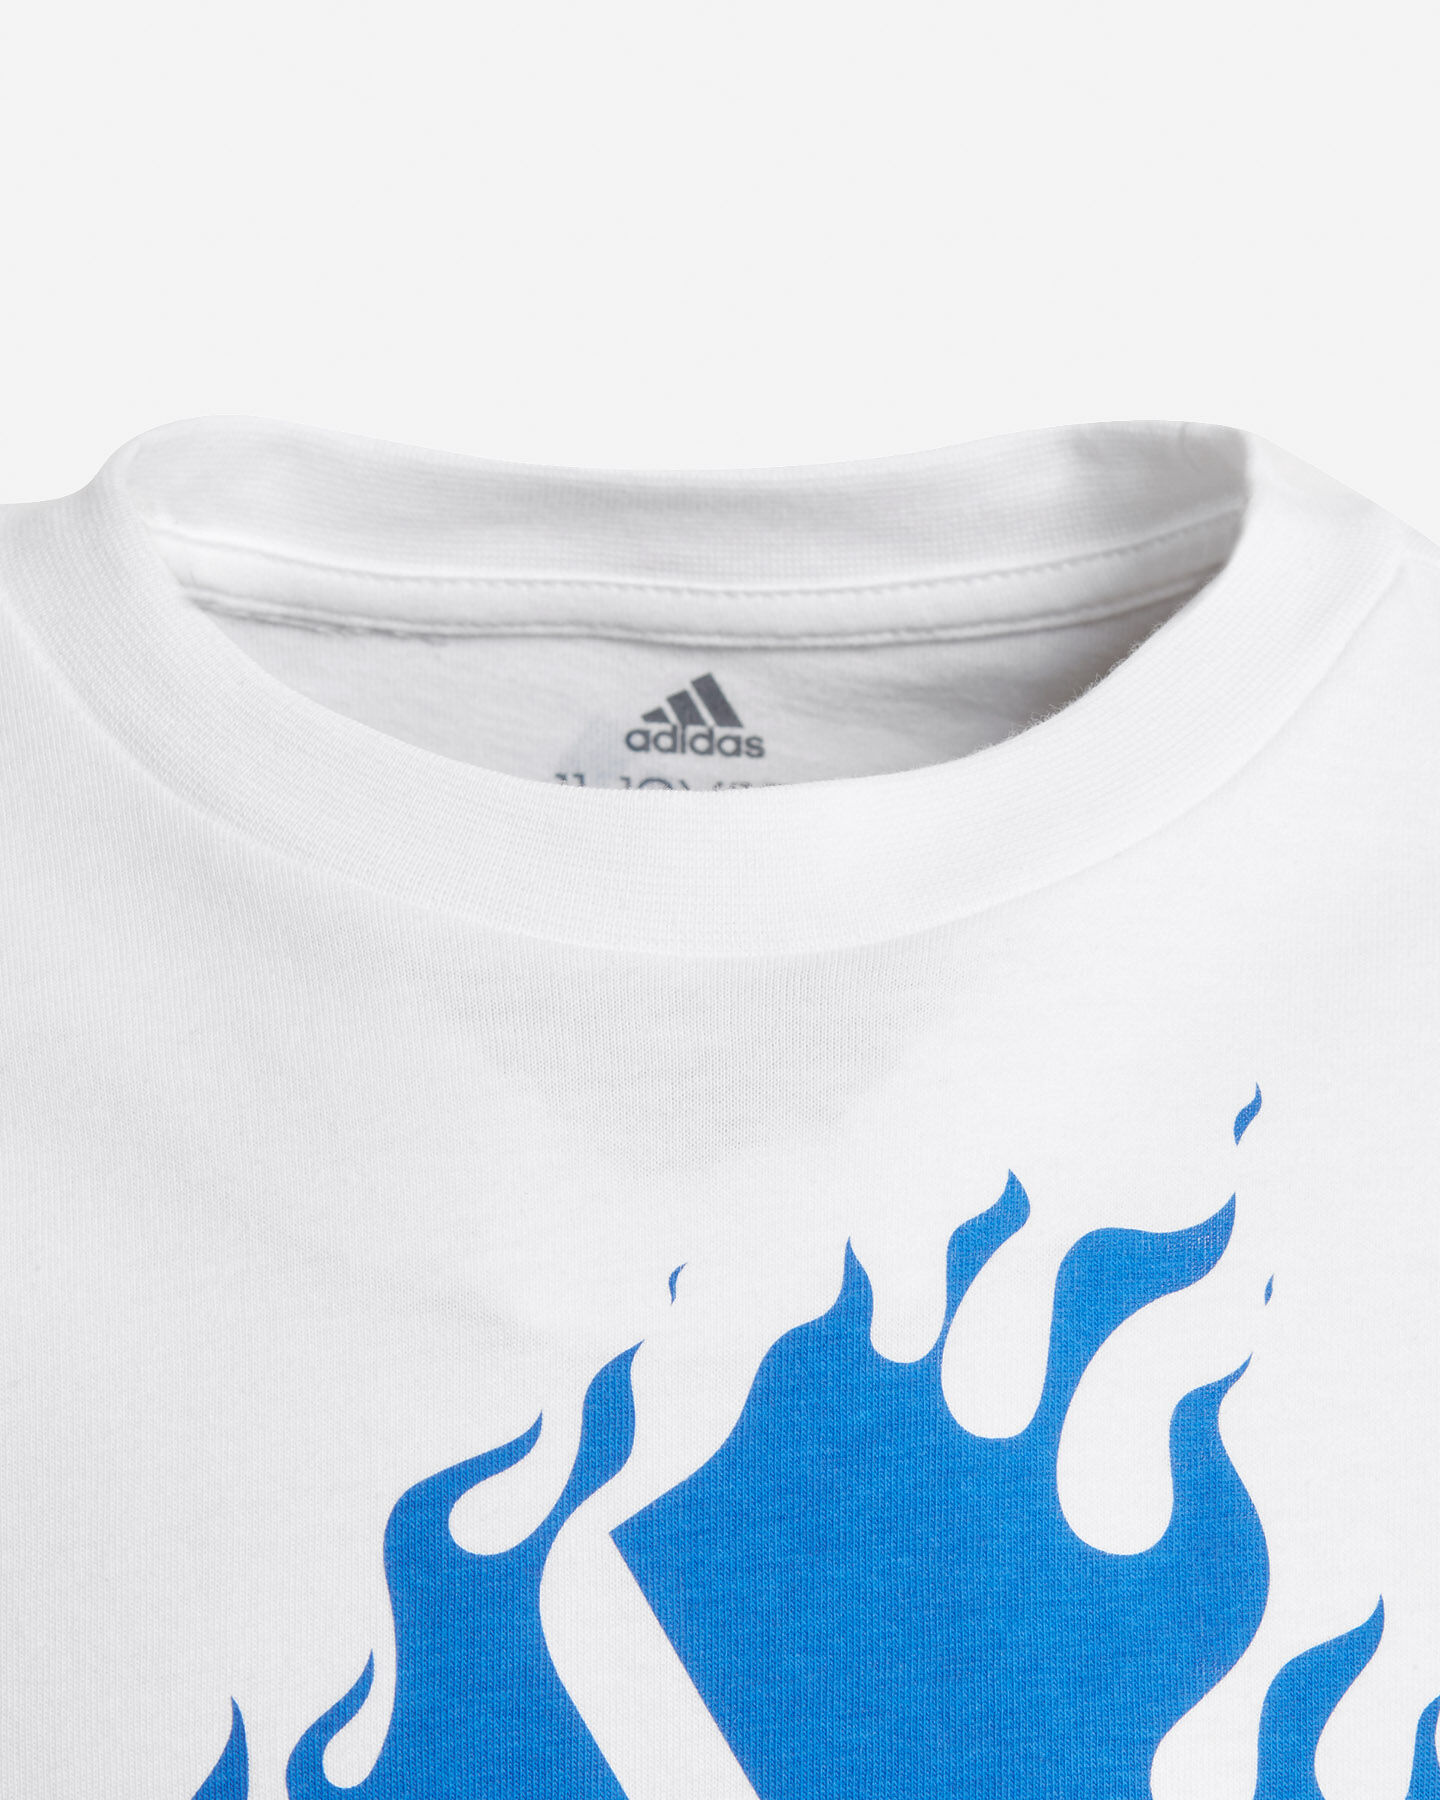  T-Shirt ADIDAS GRAPHIC JR S5211507|UNI|7-8A scatto 2